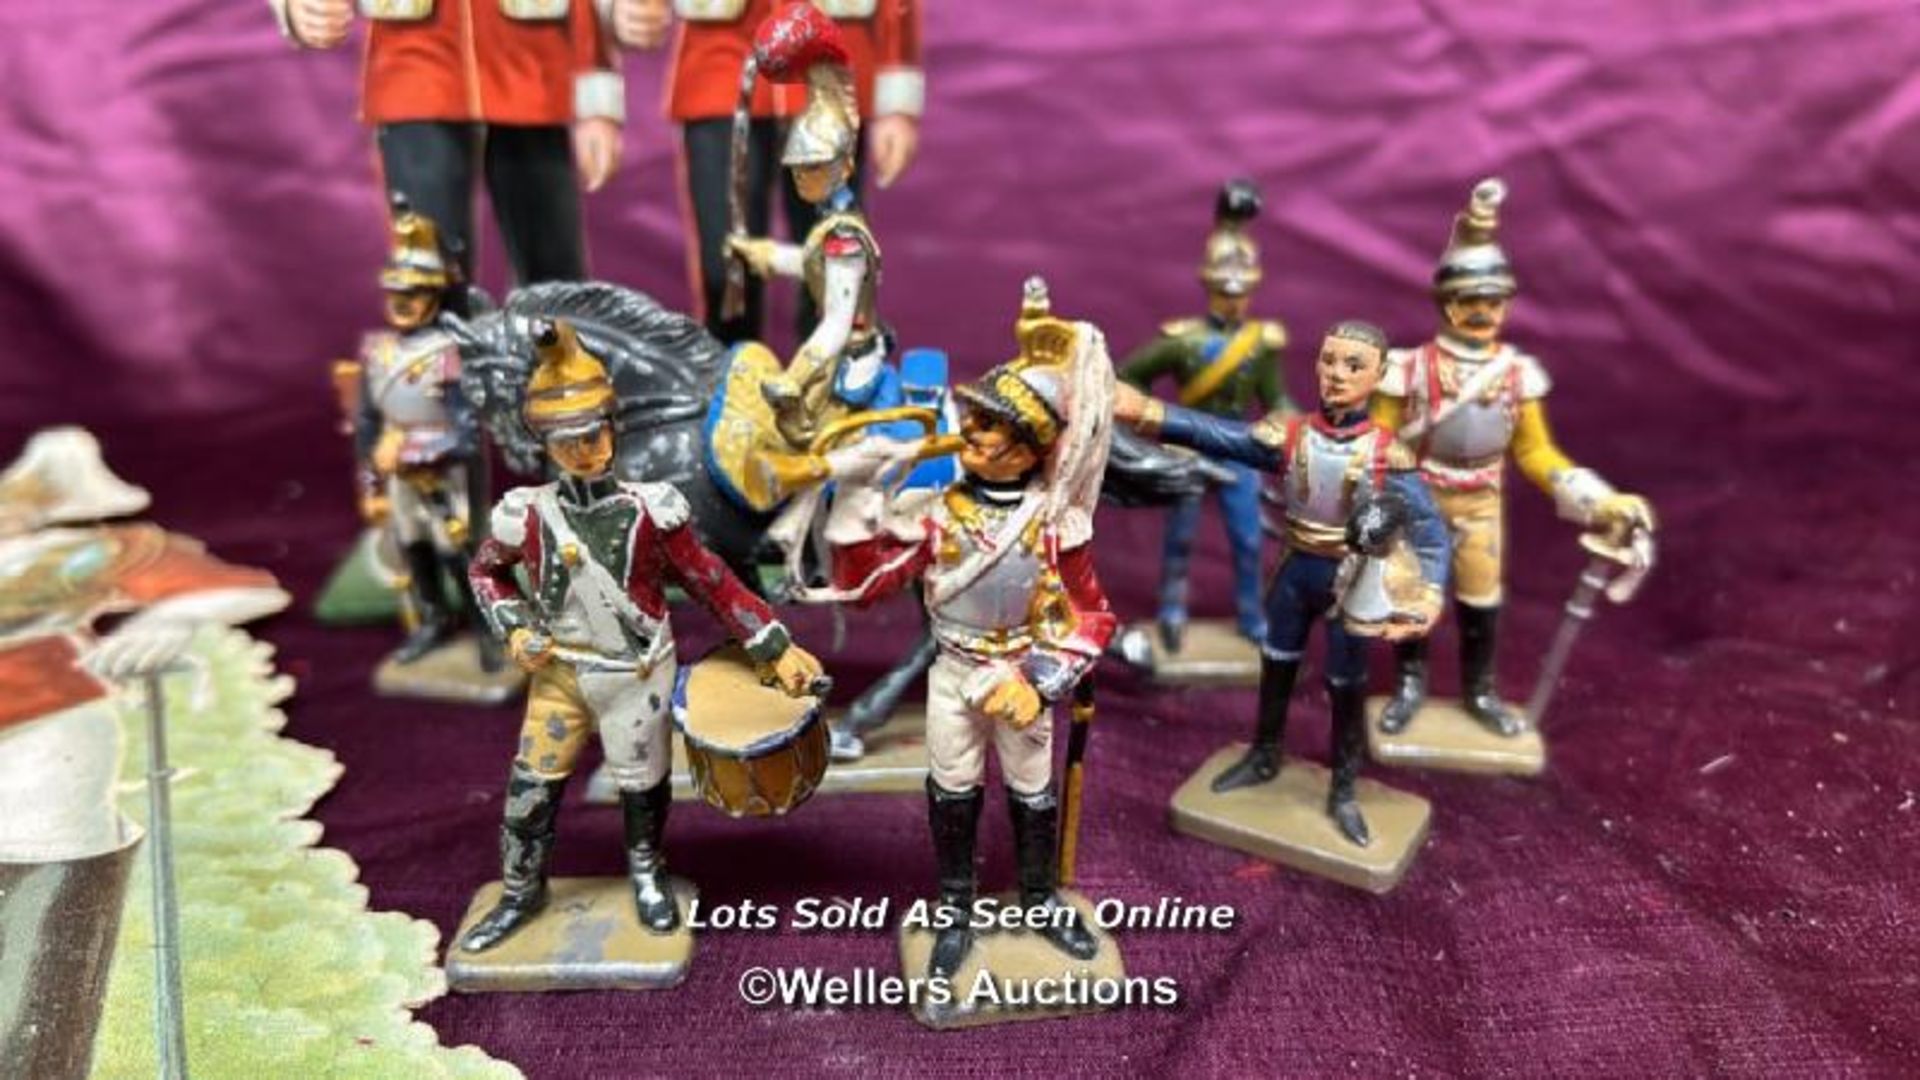 COLLECTION OF 19TH CENTURY PAPER DECOUPAGE SOLDIERS AND SEVEN FRENCH DRAGOON LEAD SOLDIERS - Image 4 of 6